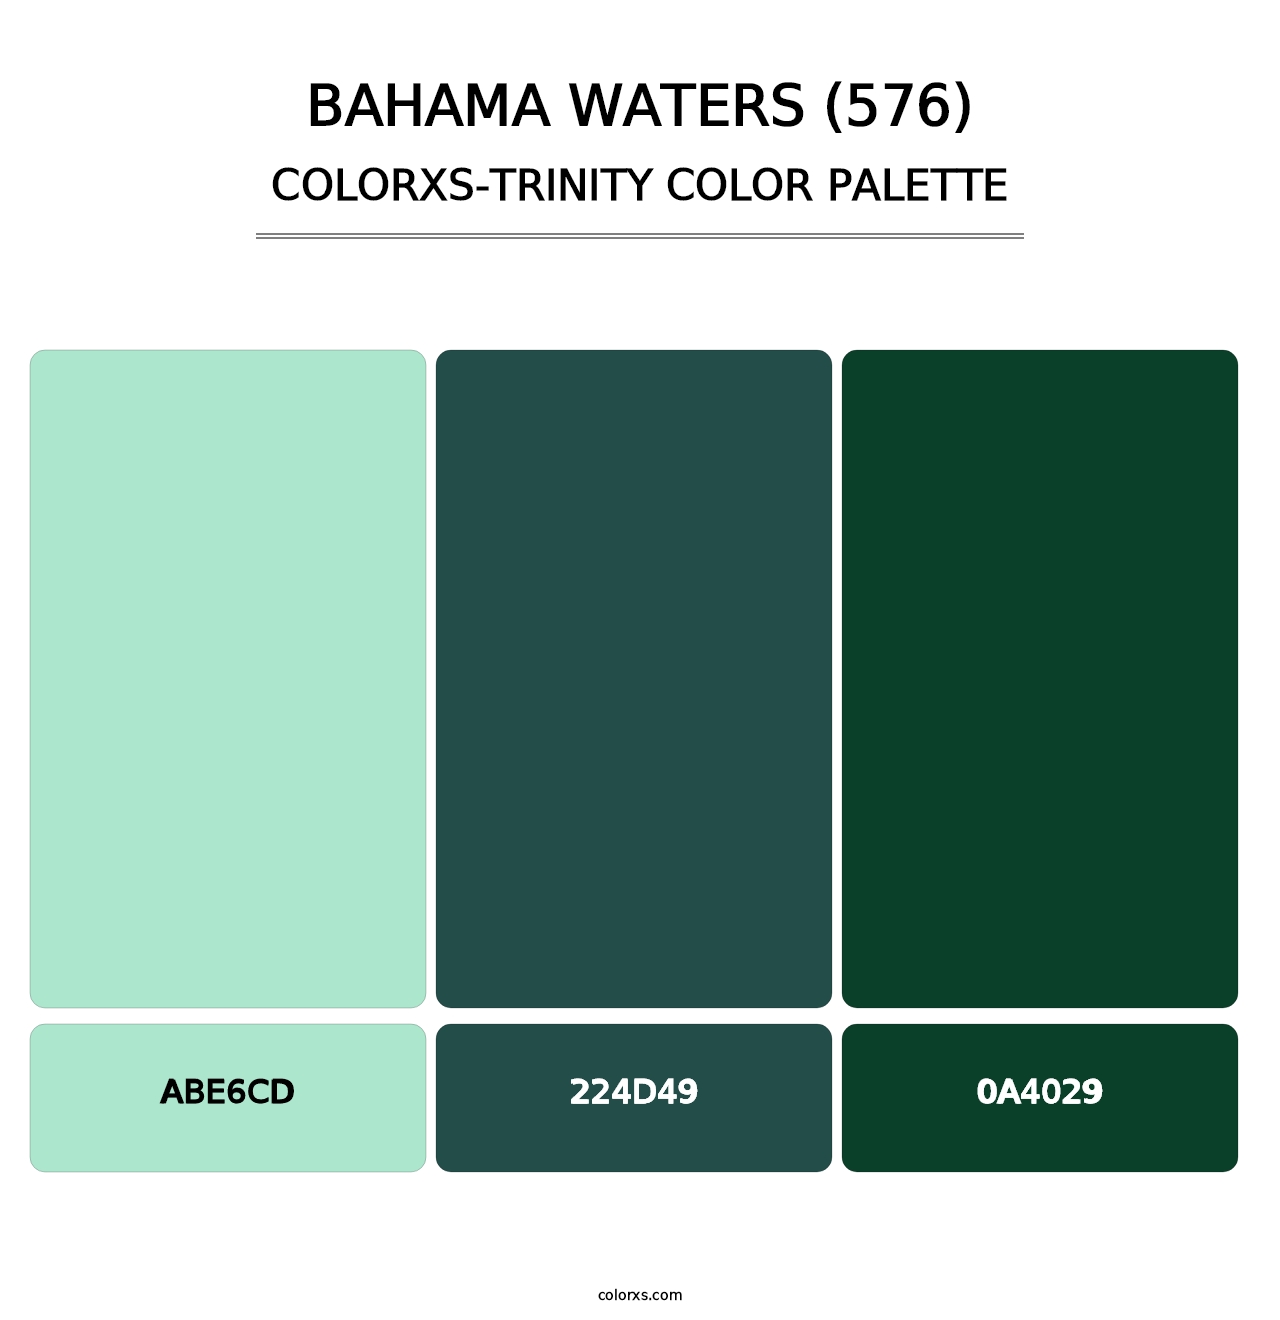 Bahama Waters (576) - Colorxs Trinity Palette